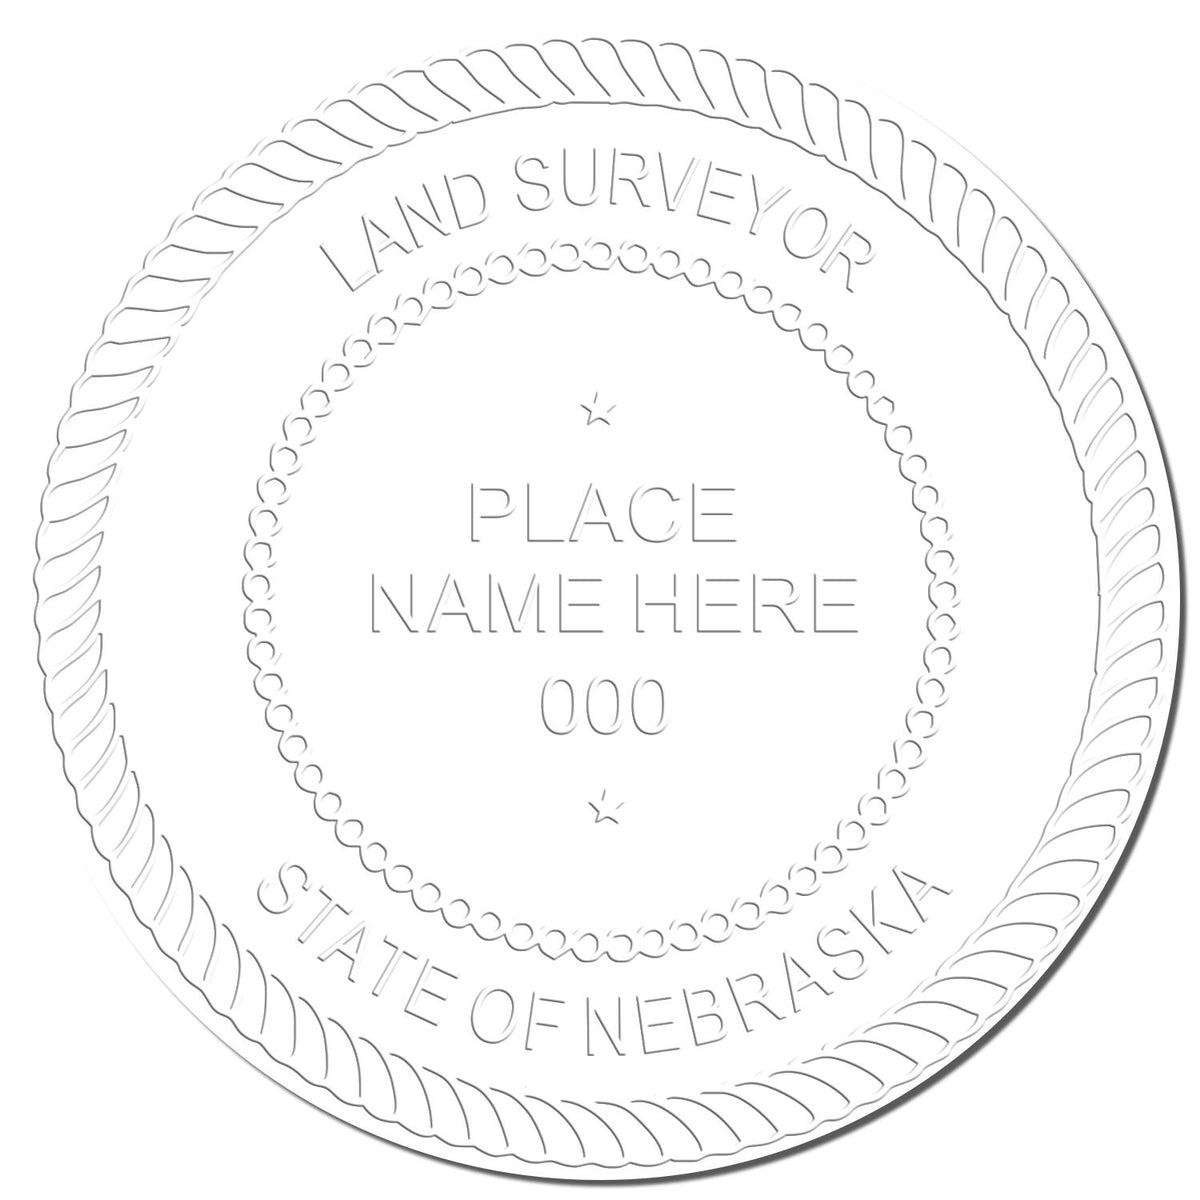 This paper is stamped with a sample imprint of the Gift Nebraska Land Surveyor Seal, signifying its quality and reliability.